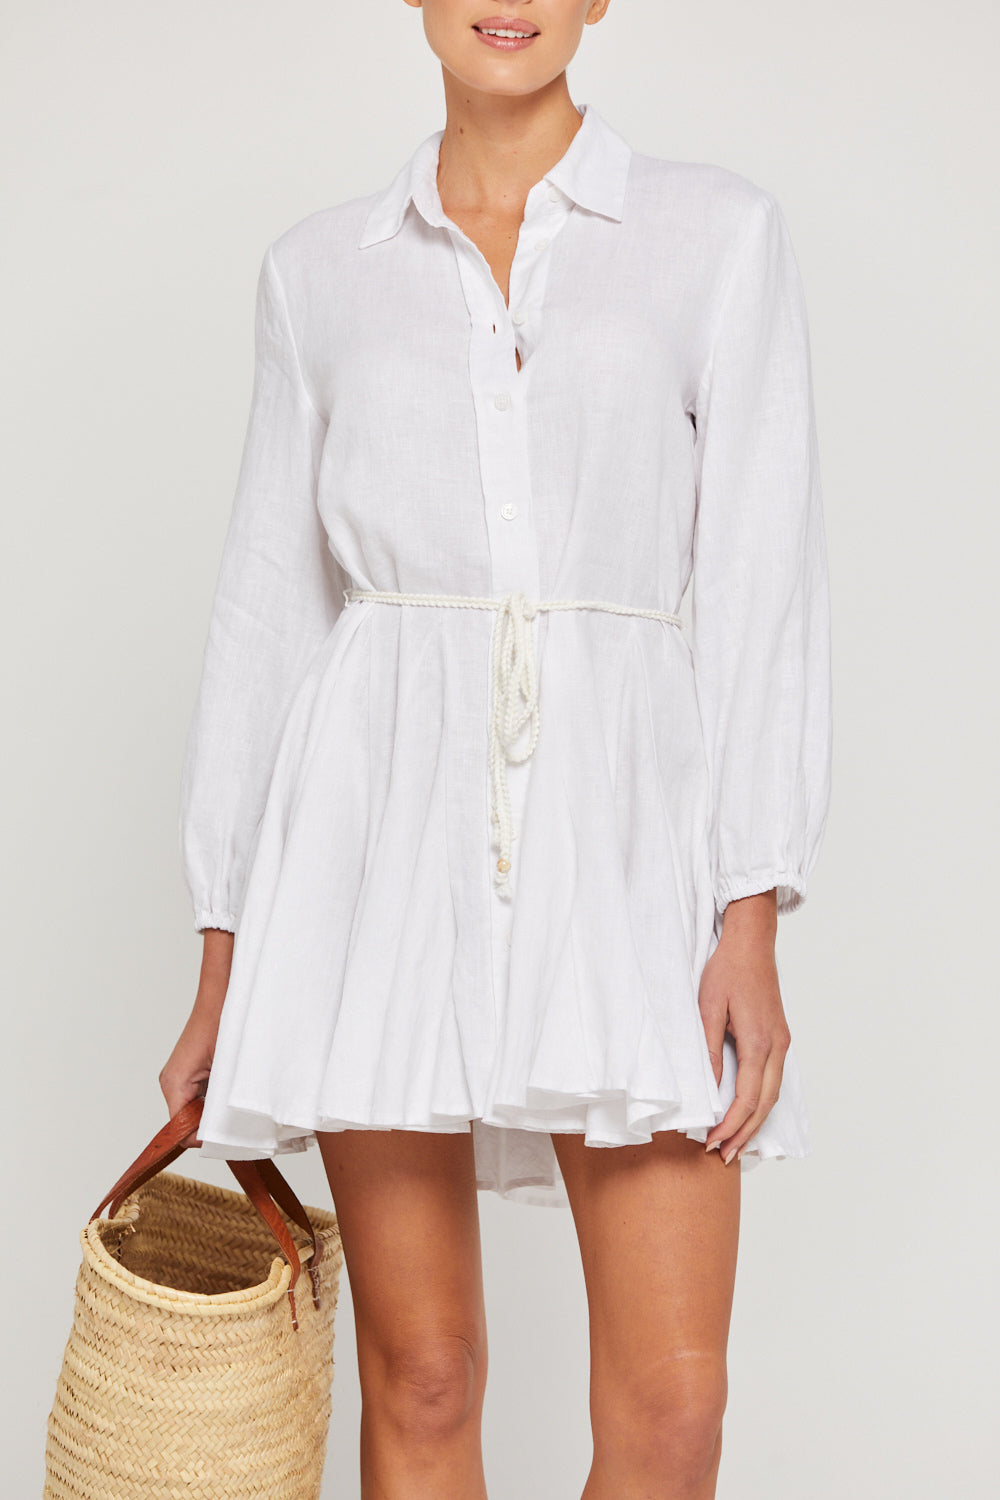 Parallel Culture Shoes and Fashion Online DRESSES BY RIDLEY PENNY DRESS WHITE